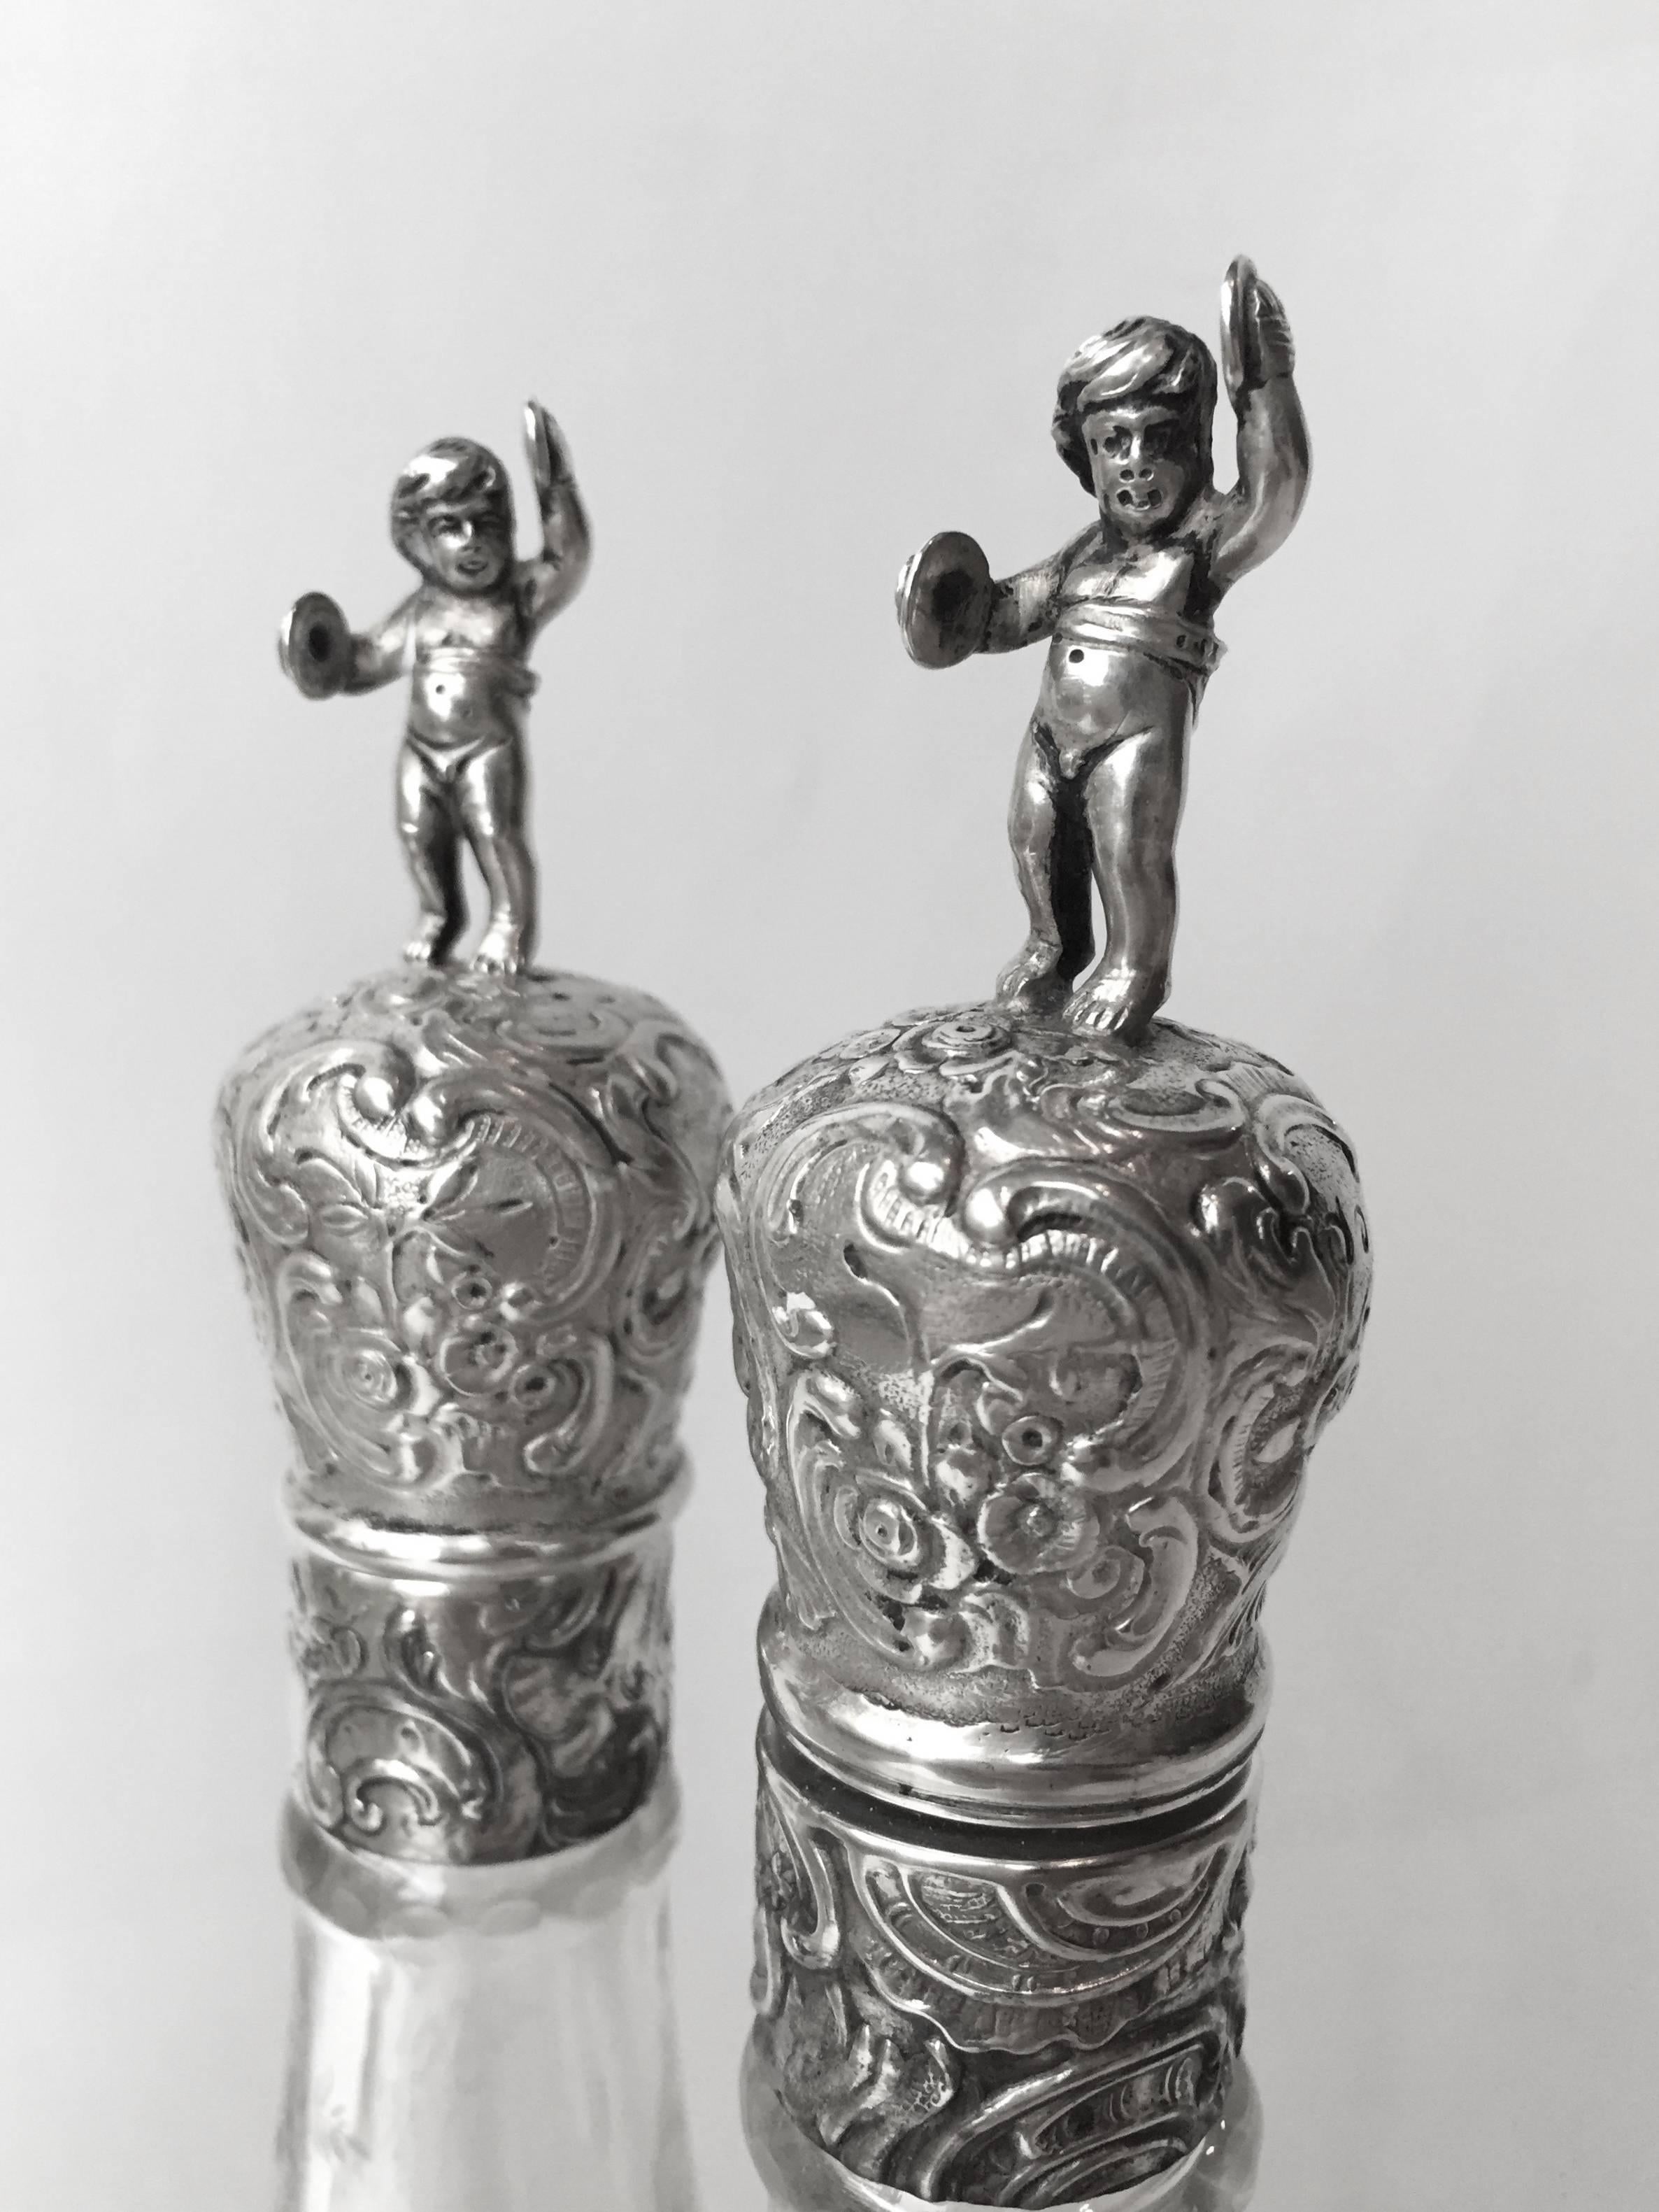 A fabulous double pair of German fine 800 silver decanters richly cast and chased with wonderful subject matter the pair made circa 1900 and are in excellent condition great on the table and in the bar.